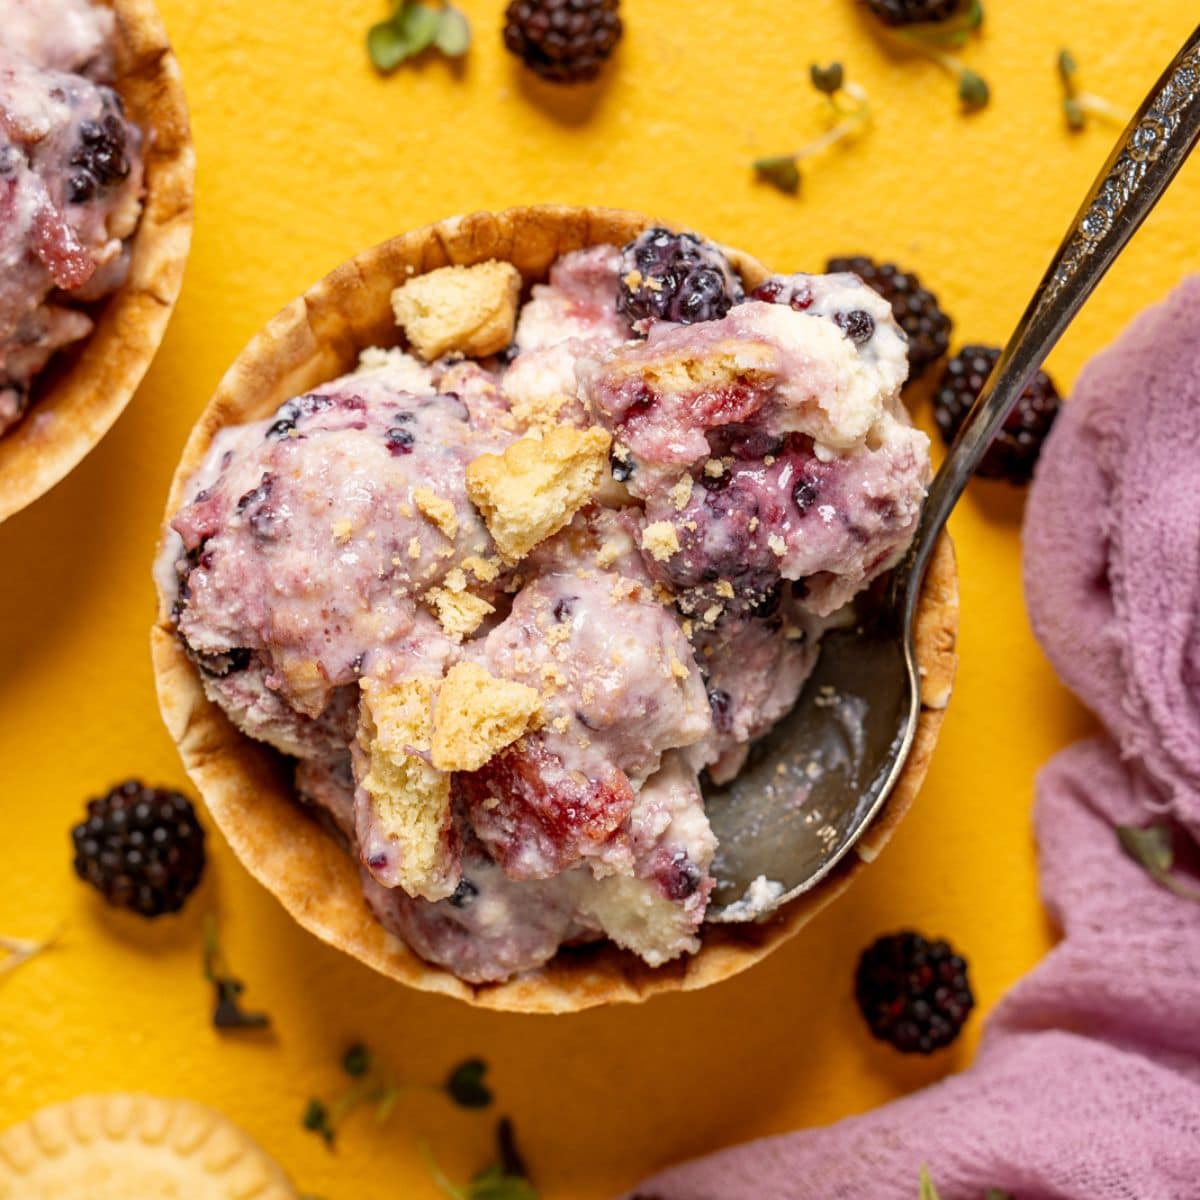 Ice cream in two cones with a spoon, blackberries, and cookies.